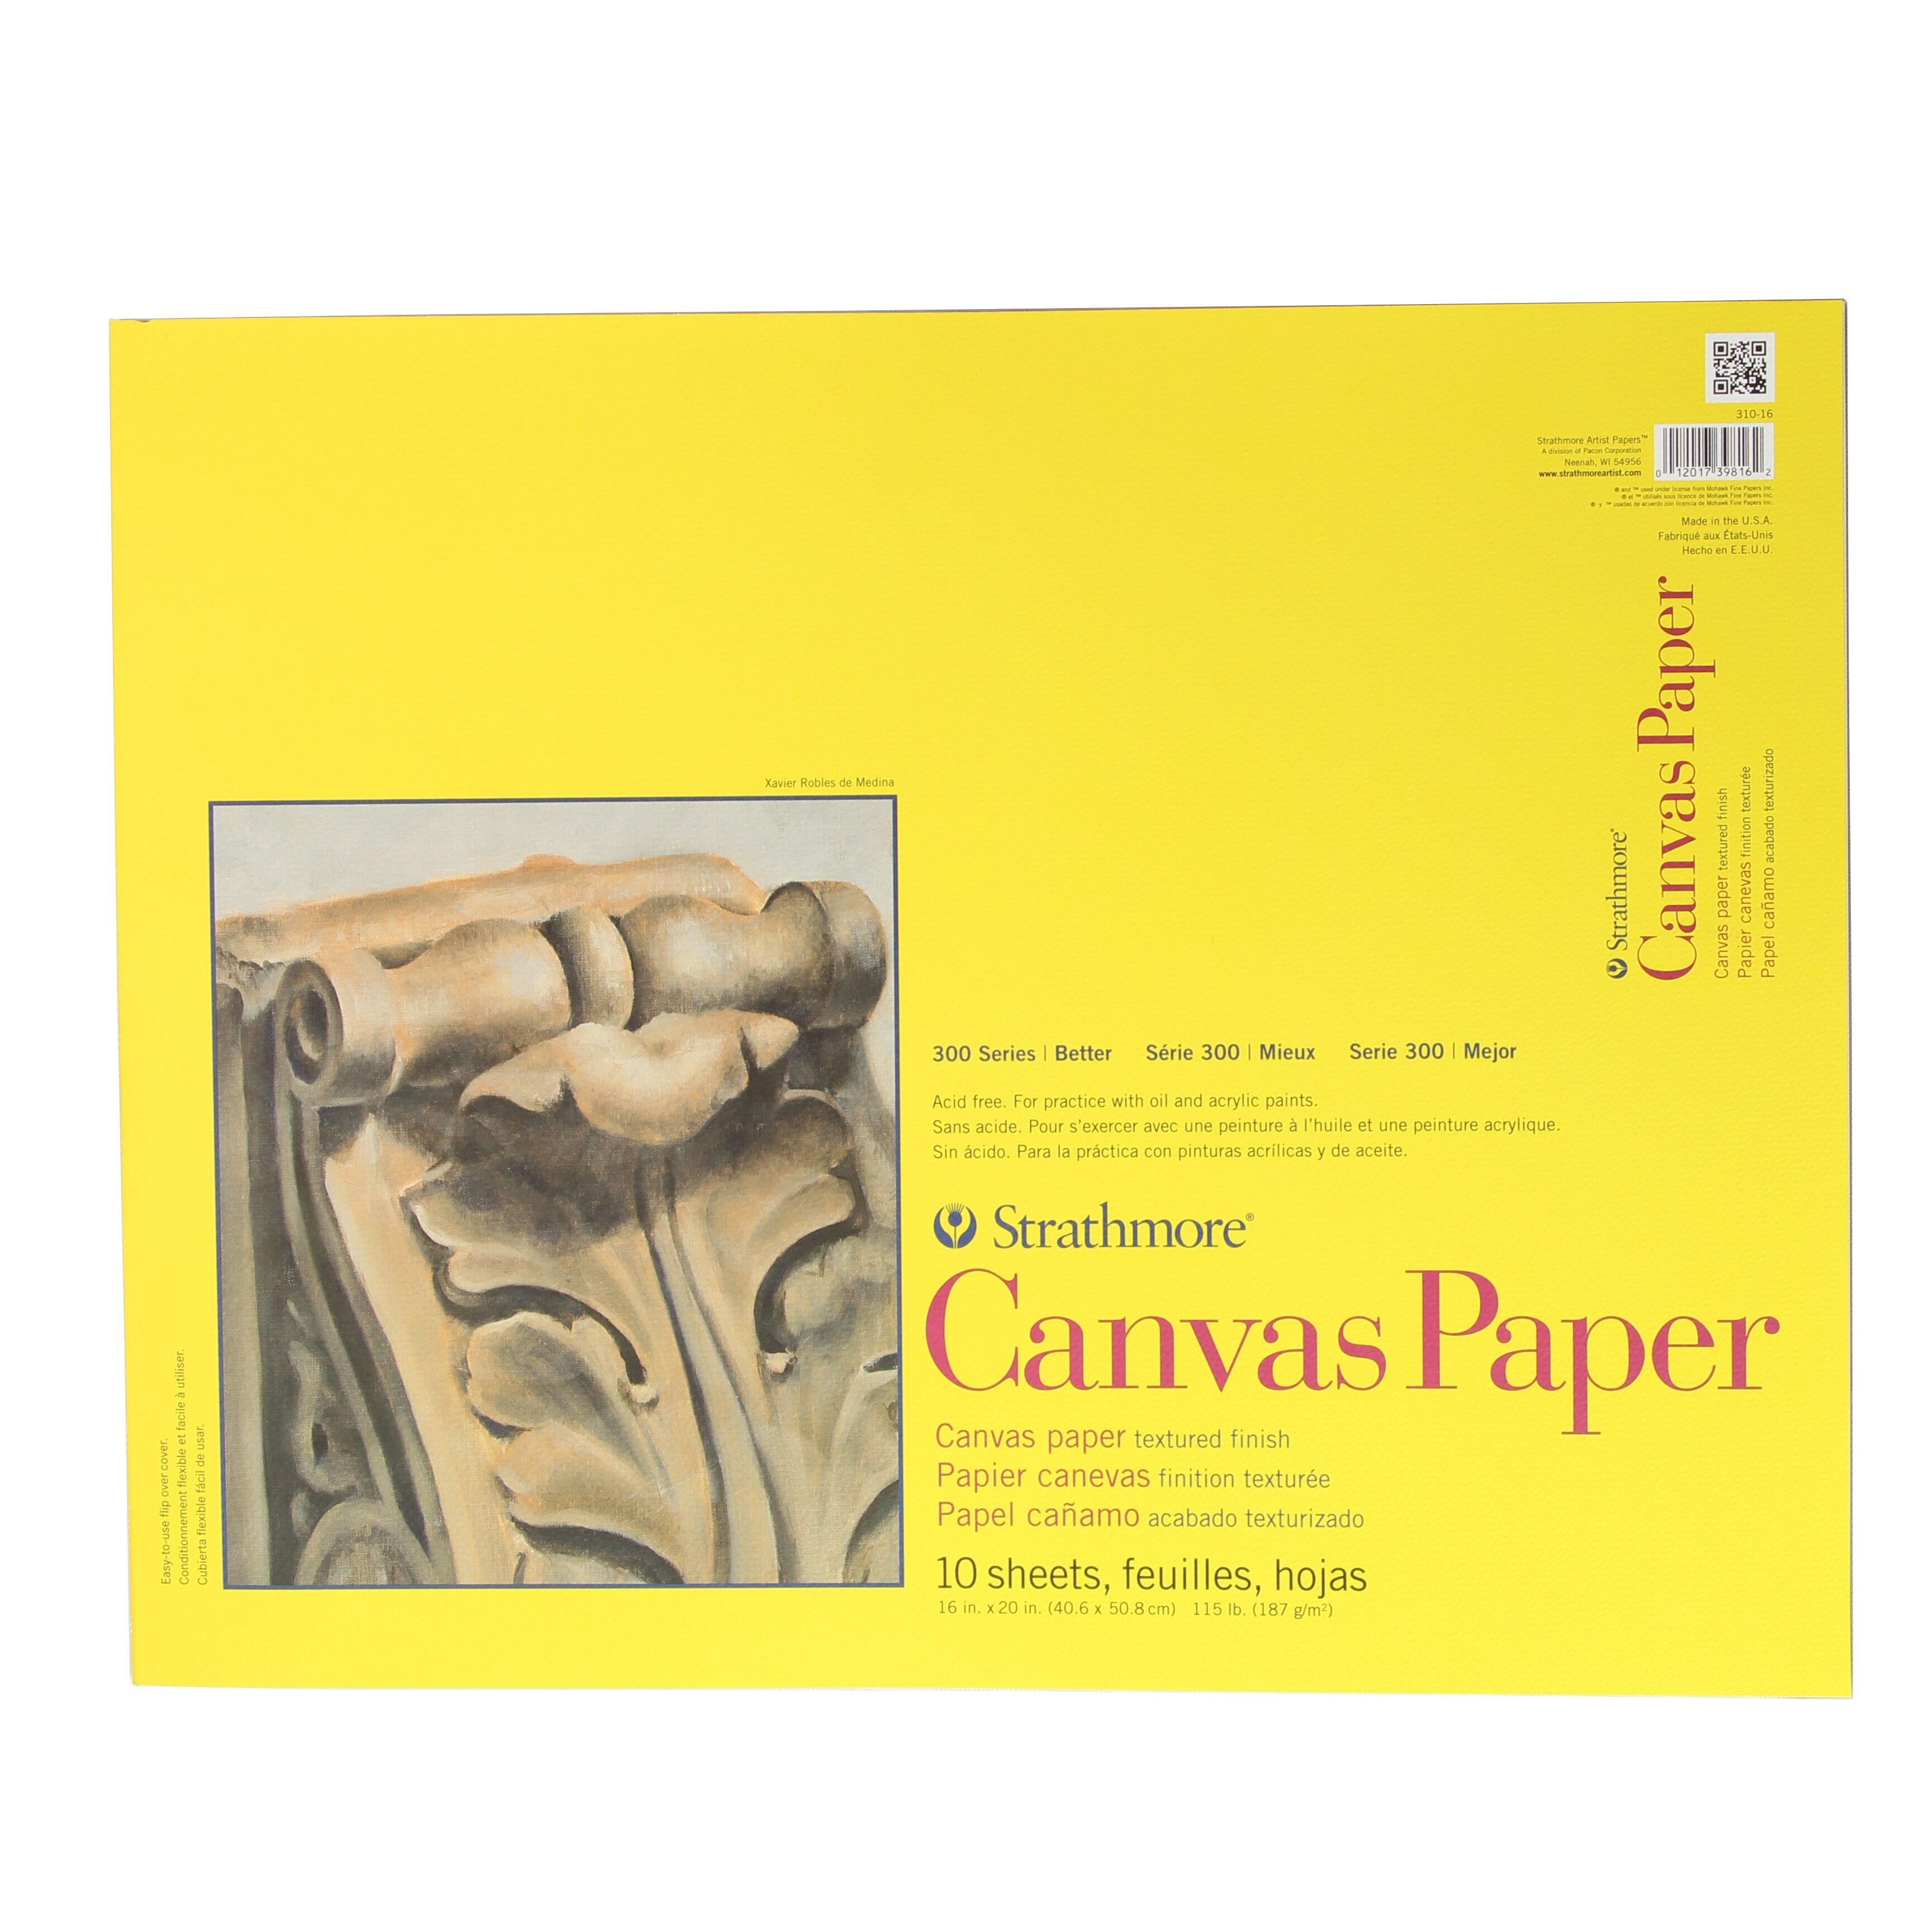 Strathmore Canvas Paper Pad, 300 Series, 16" x 20"